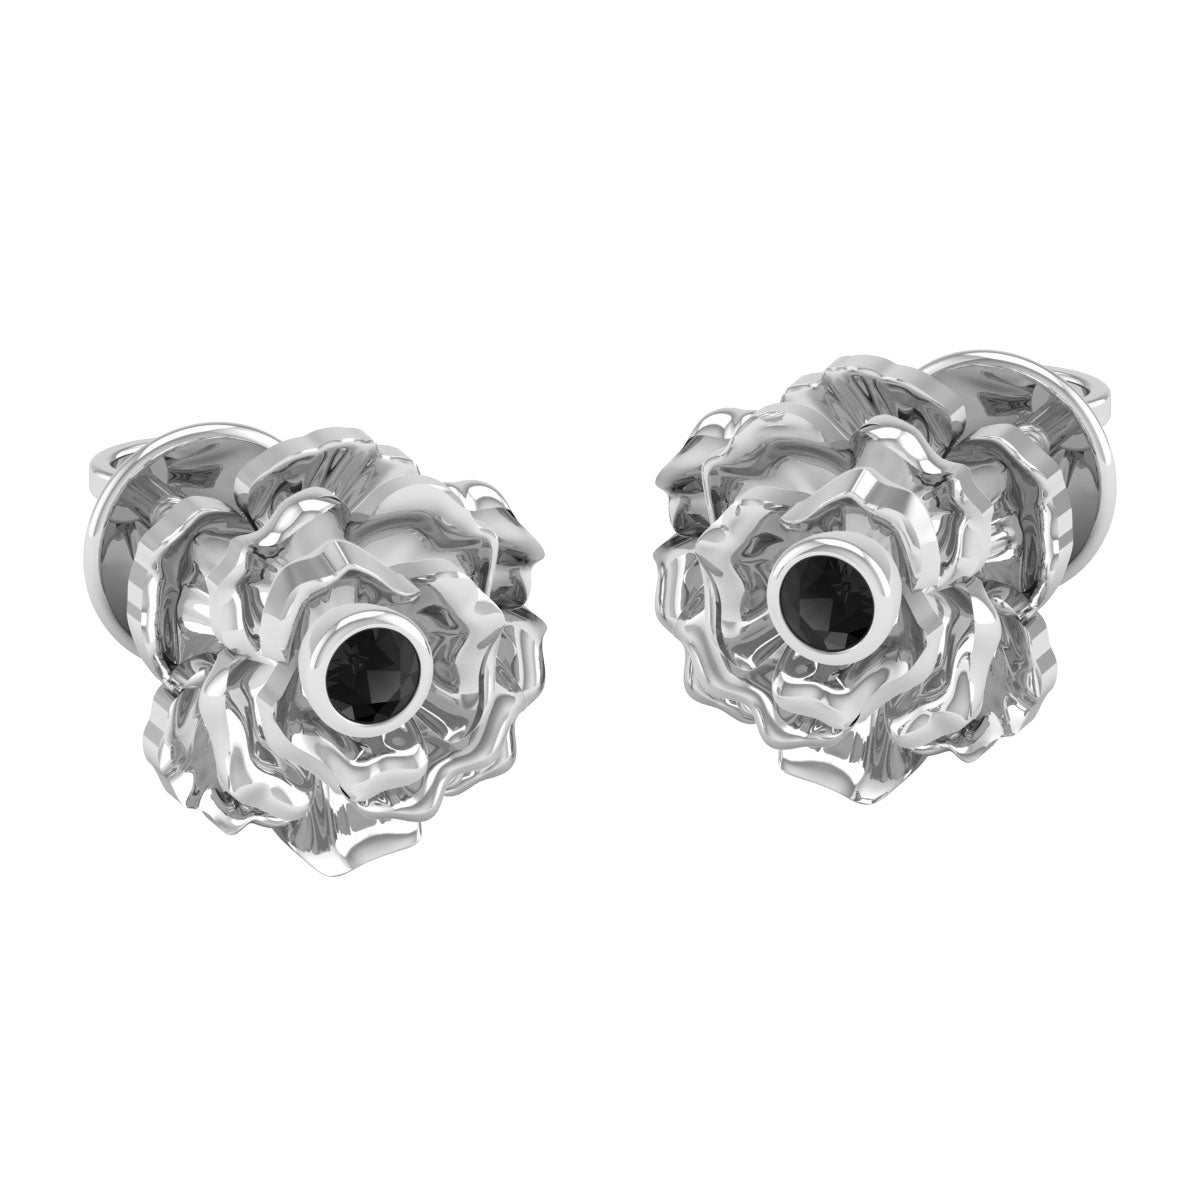 Akshat Sapphire Sterling Silver (92.5% purity) Precious Stud Earrings for Girls and Women Pure Silver Beautiful and Designer studs earring with cubic zirconia (AD) stones (9.5mm × 9.5mm)